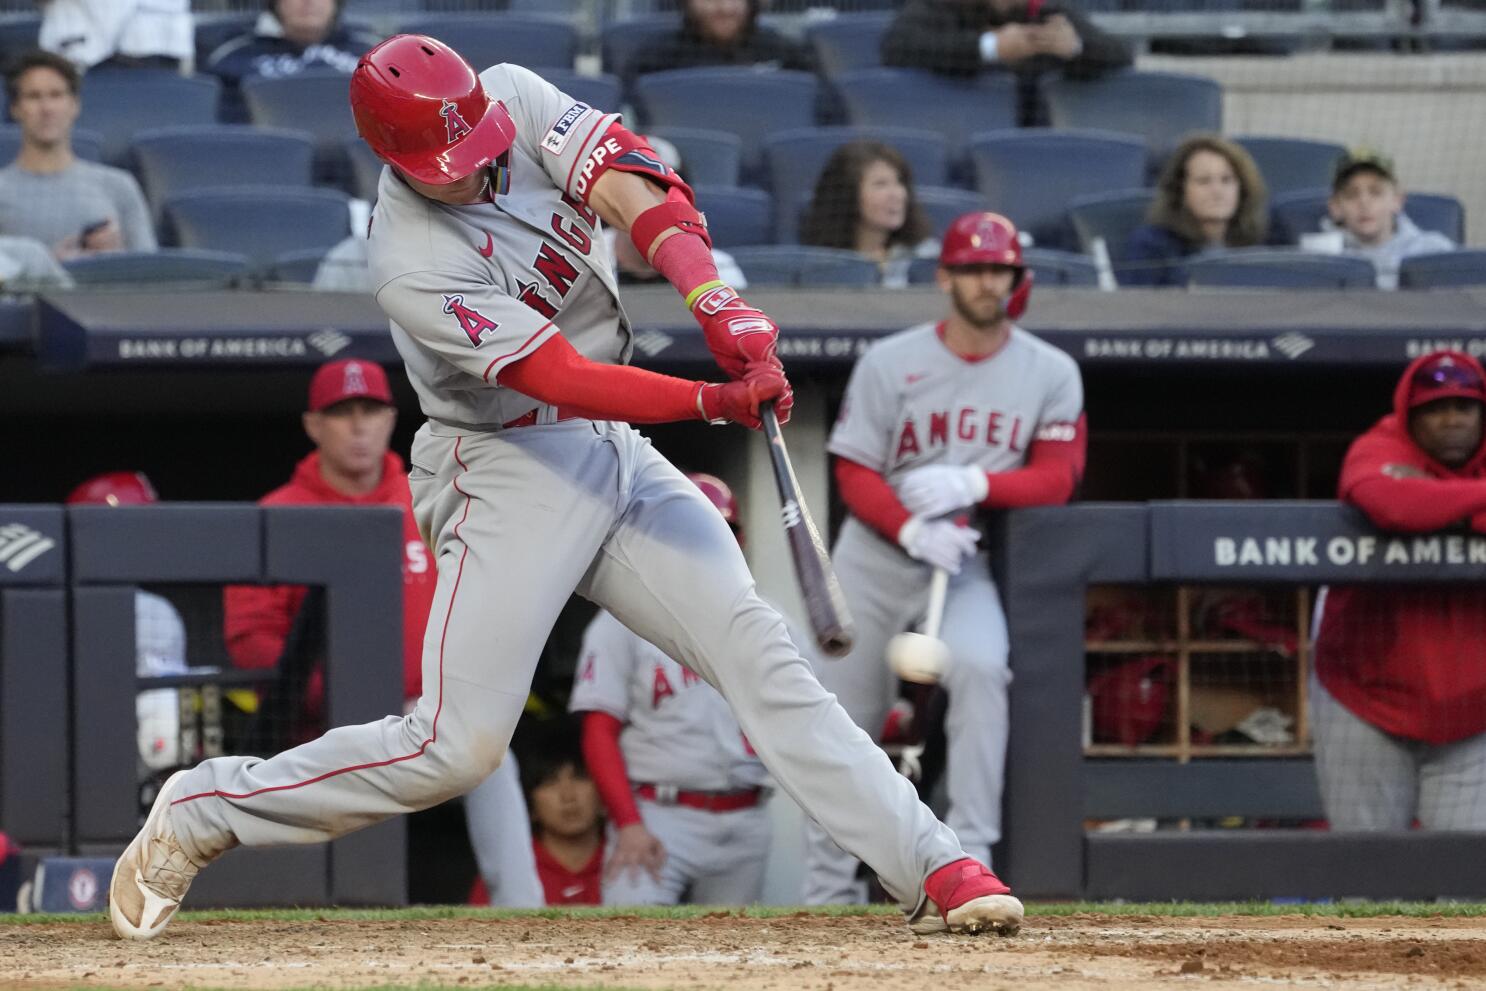 Angels rookie O'Hoppe needs surgery on torn labrum